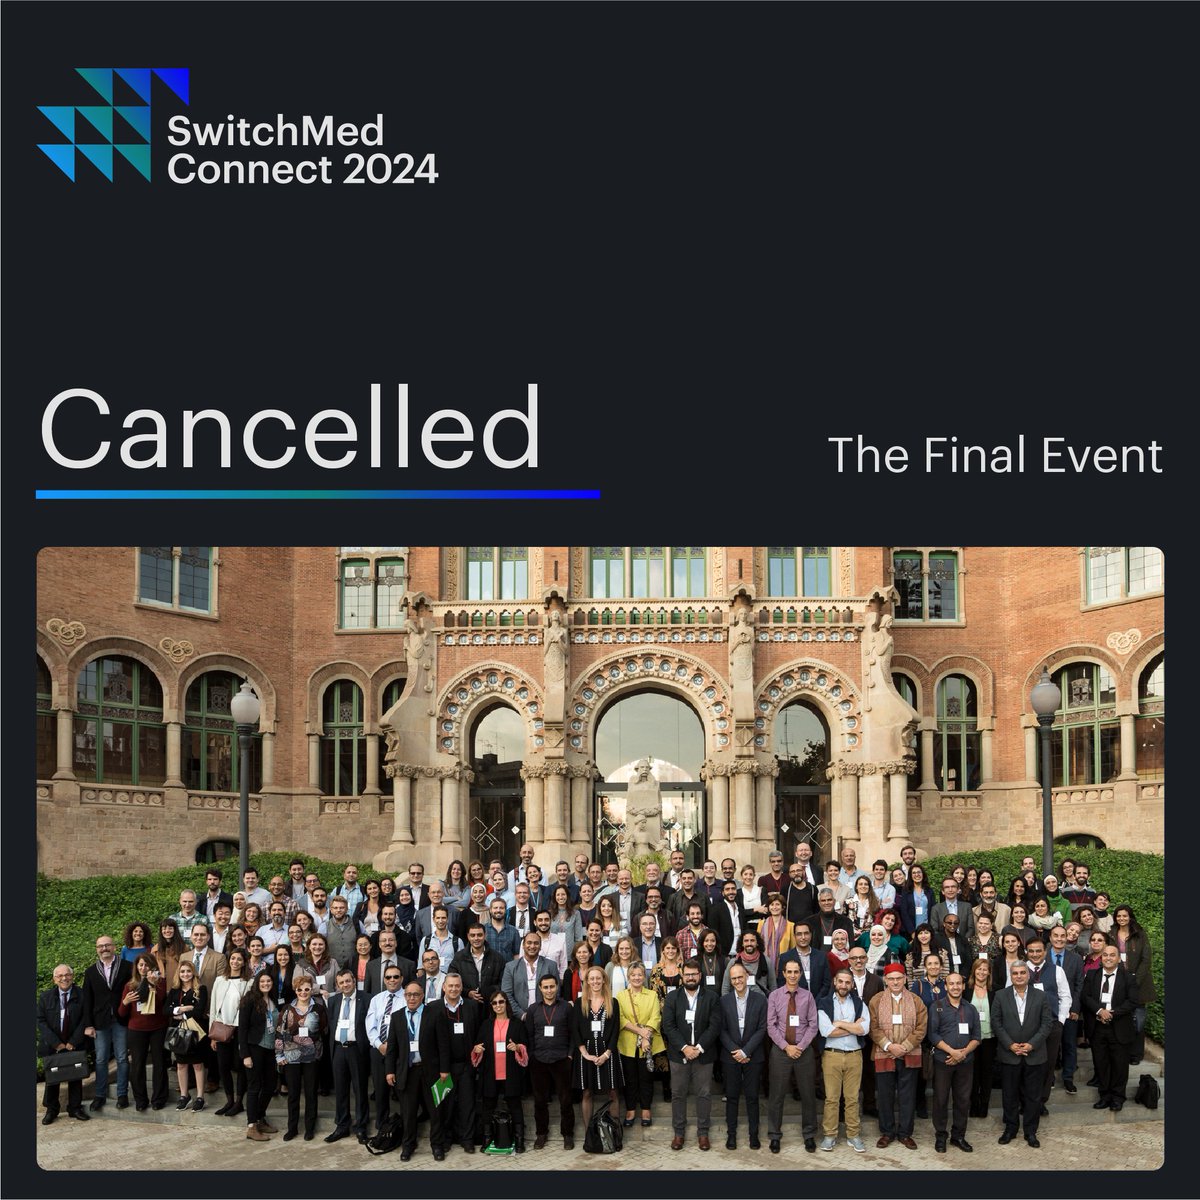 We regret to inform that due to unforeseen circumstances, we have made the difficult decision to cancel the #SwitchMedConnect 2024 event scheduled for May. We apologize for any inconvenience this may cause. Thank you for being part of the SwitchMed community!